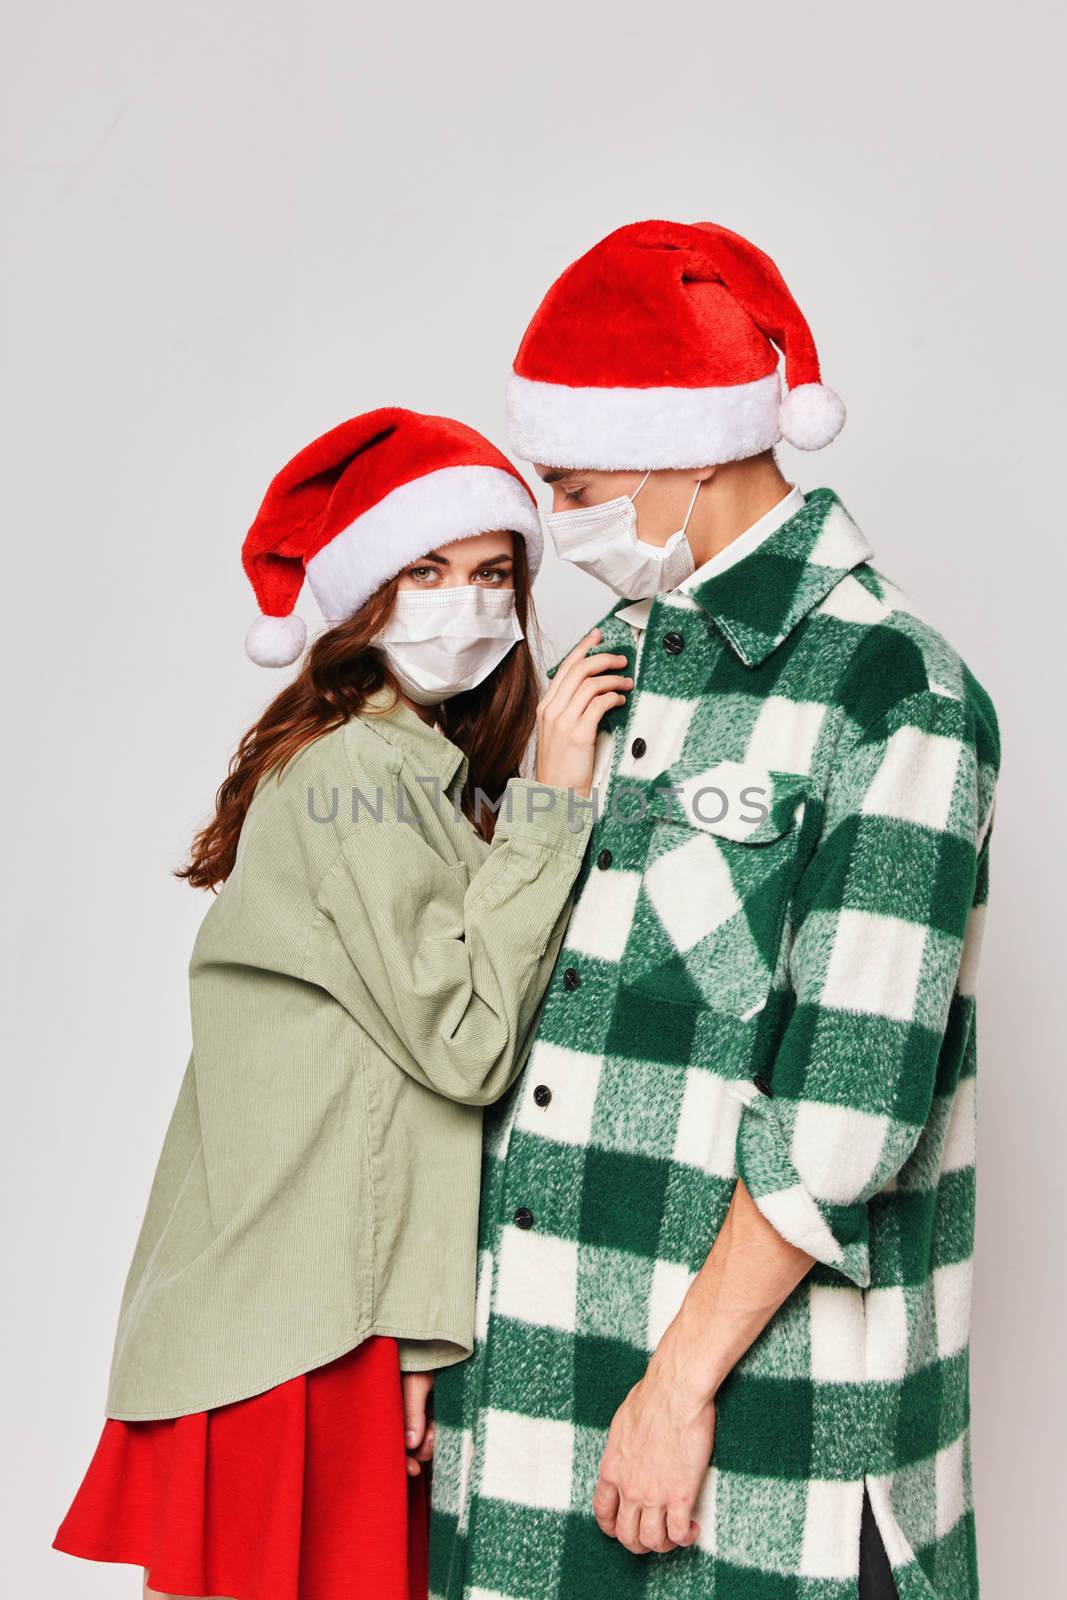 Man and woman New Years medical masks protection hugs care. High quality photo